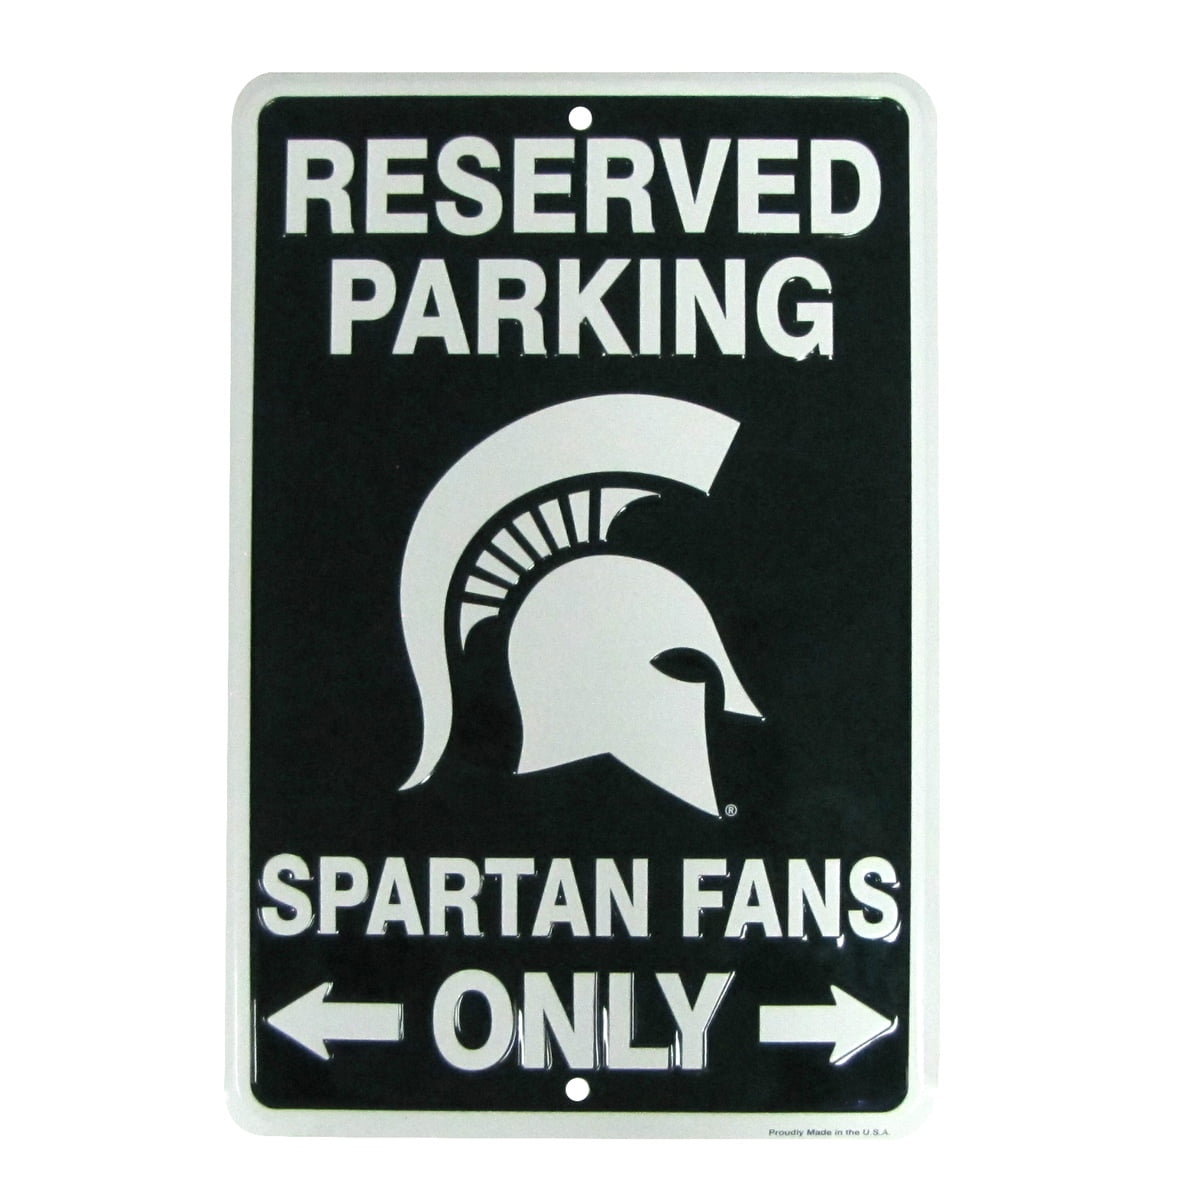 MICHIGAN STATE UNIVERSITY SPARTANS NOVELTY METAL LICENSE PLATE TAG MSU SPARTY